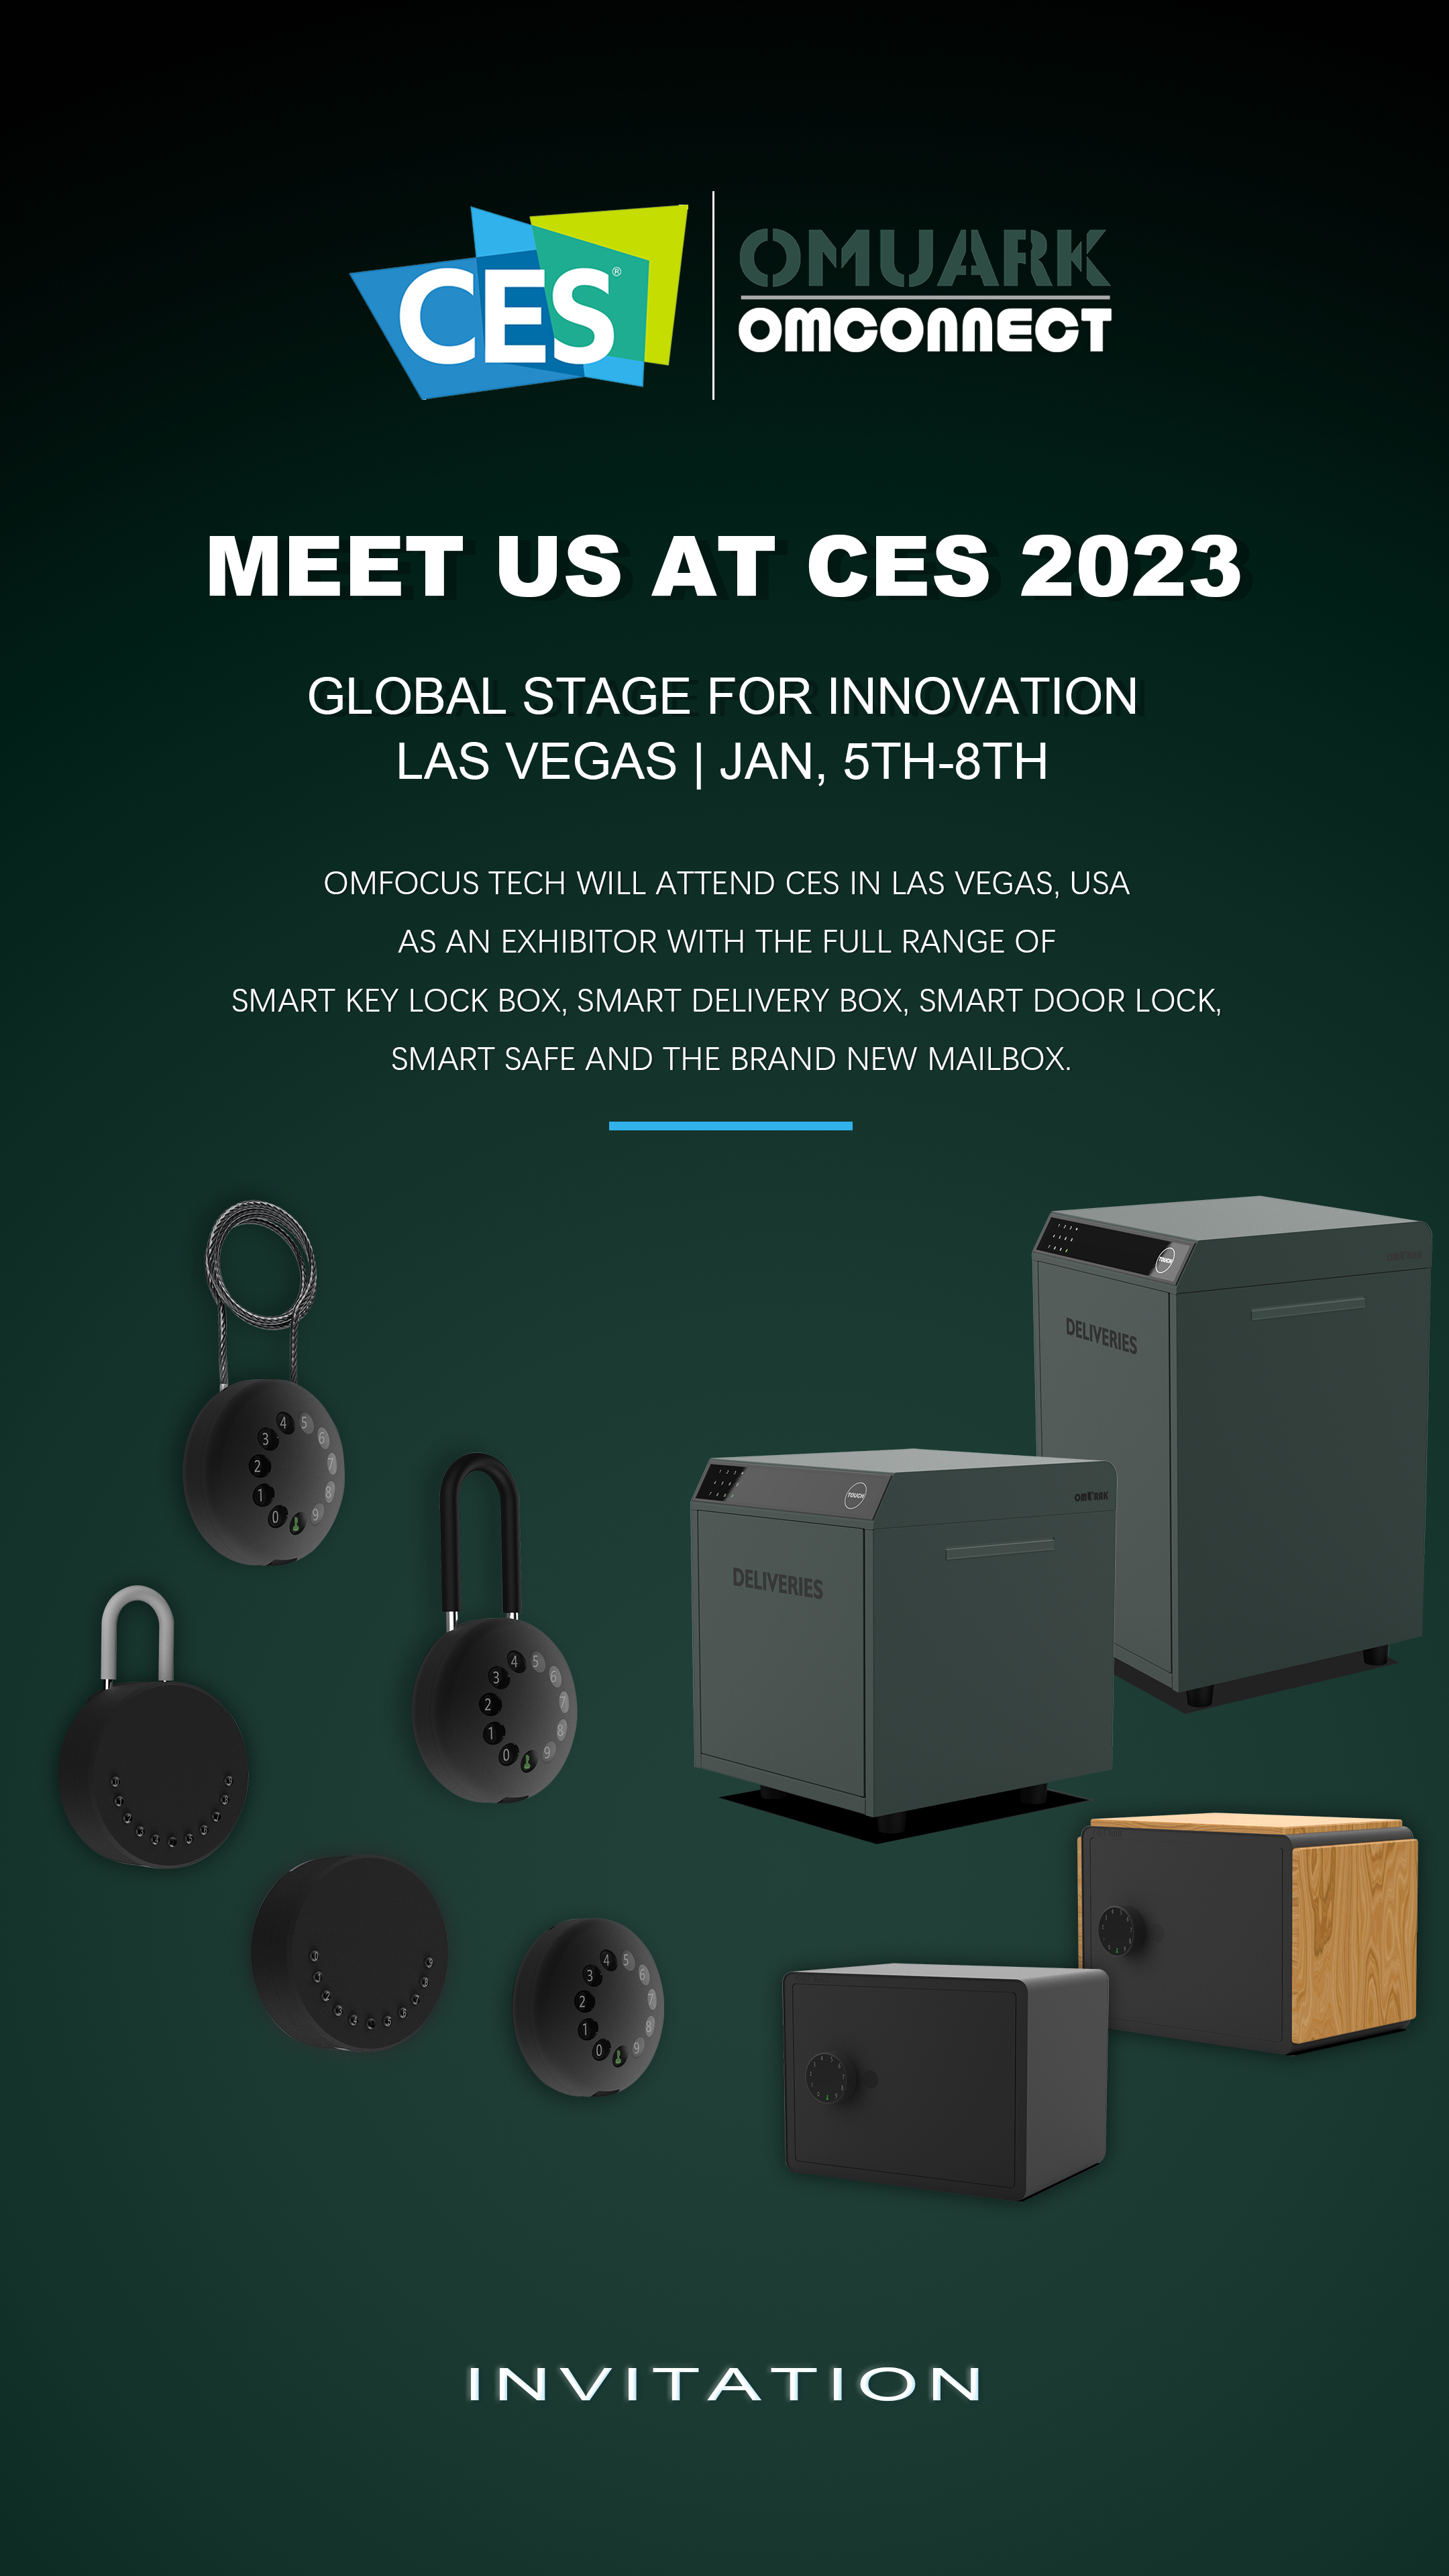 CES 2023 | GLOBAL STAGE FOR INNOVATION | LAS VEGAS | JAN, 5TH-8TH |(图1)